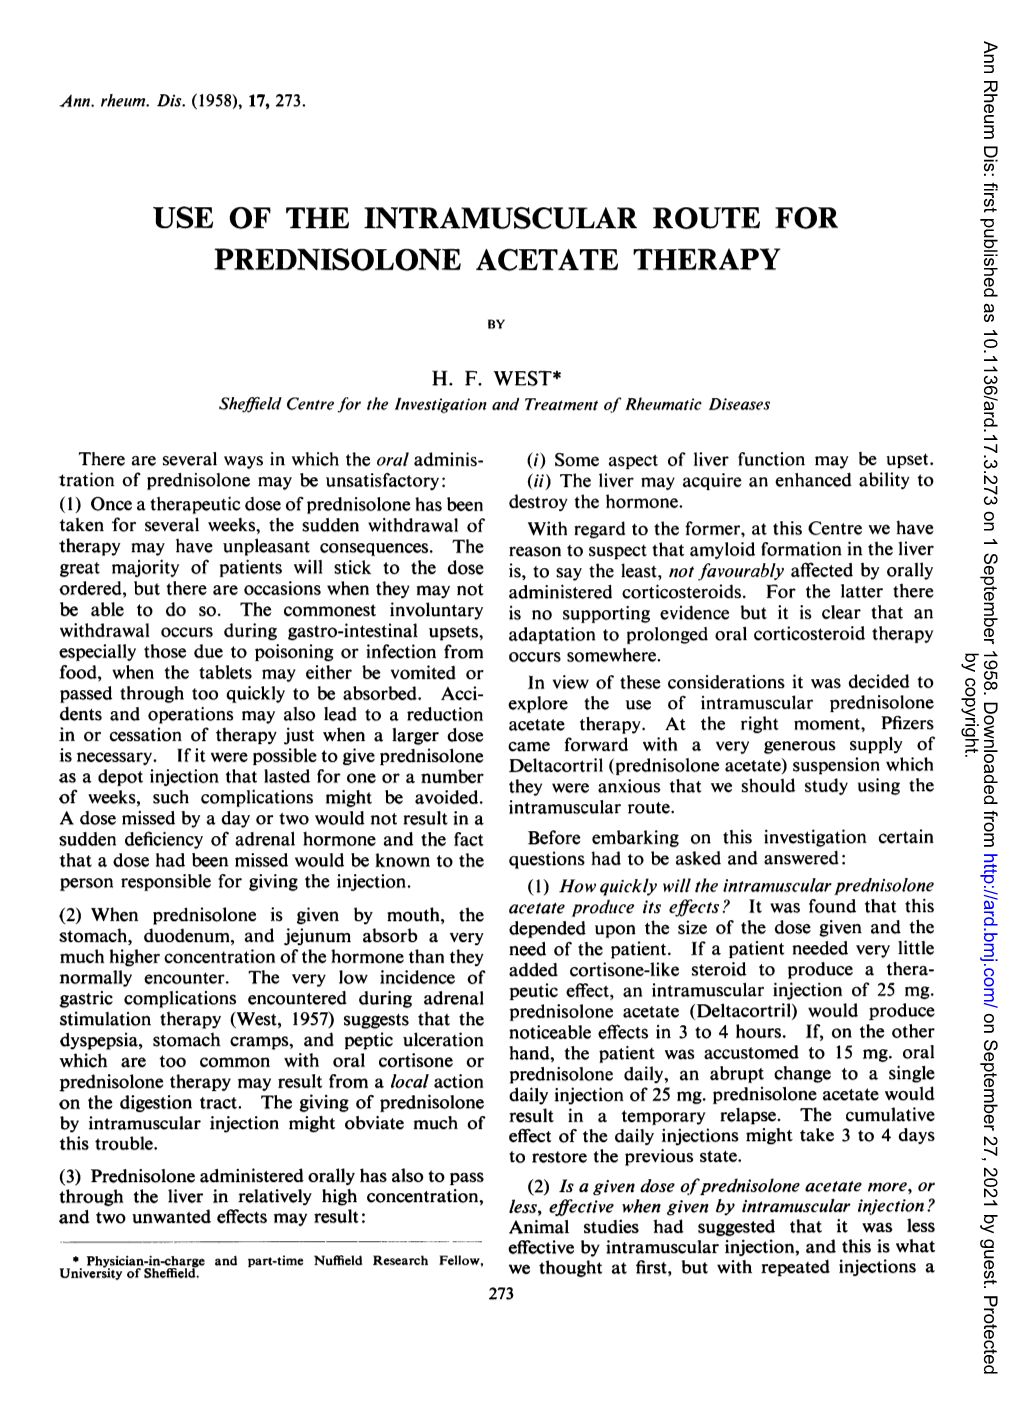 Use of the Intramuscular Route for Prednisolone Acetate Therapy